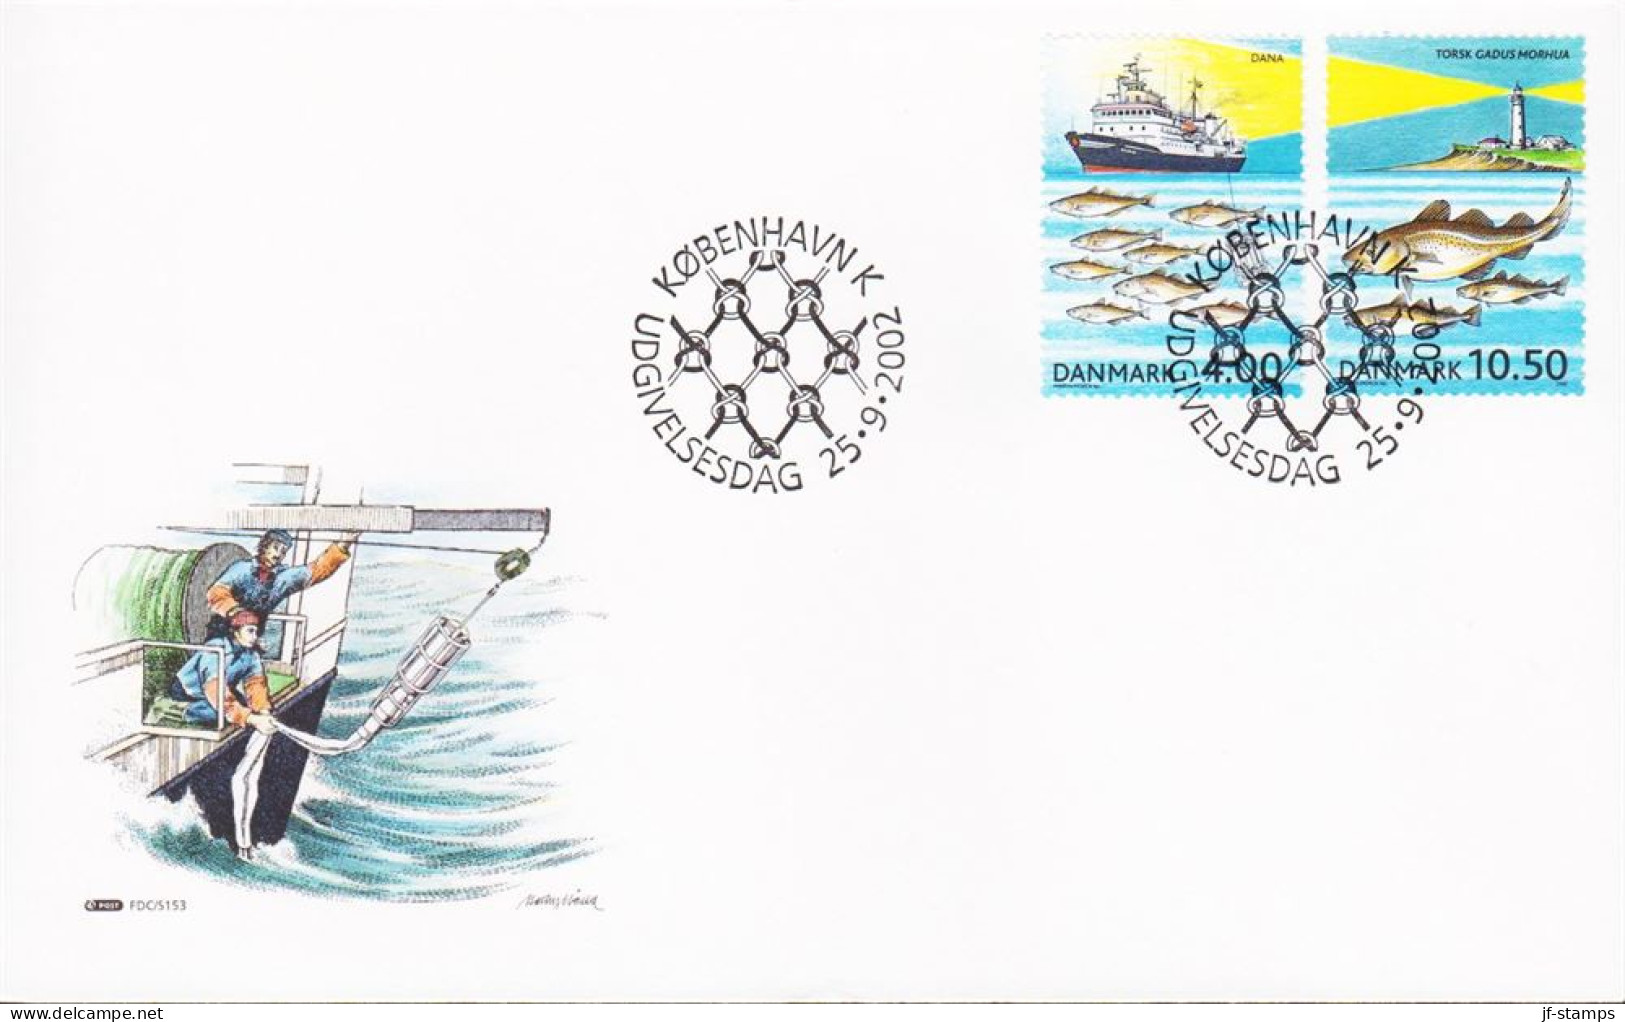 2002. DANMARK. Maritime Research Complete Set On FDC 25.9.2002.  (Michel 1316-1317) - JF544786 - Covers & Documents